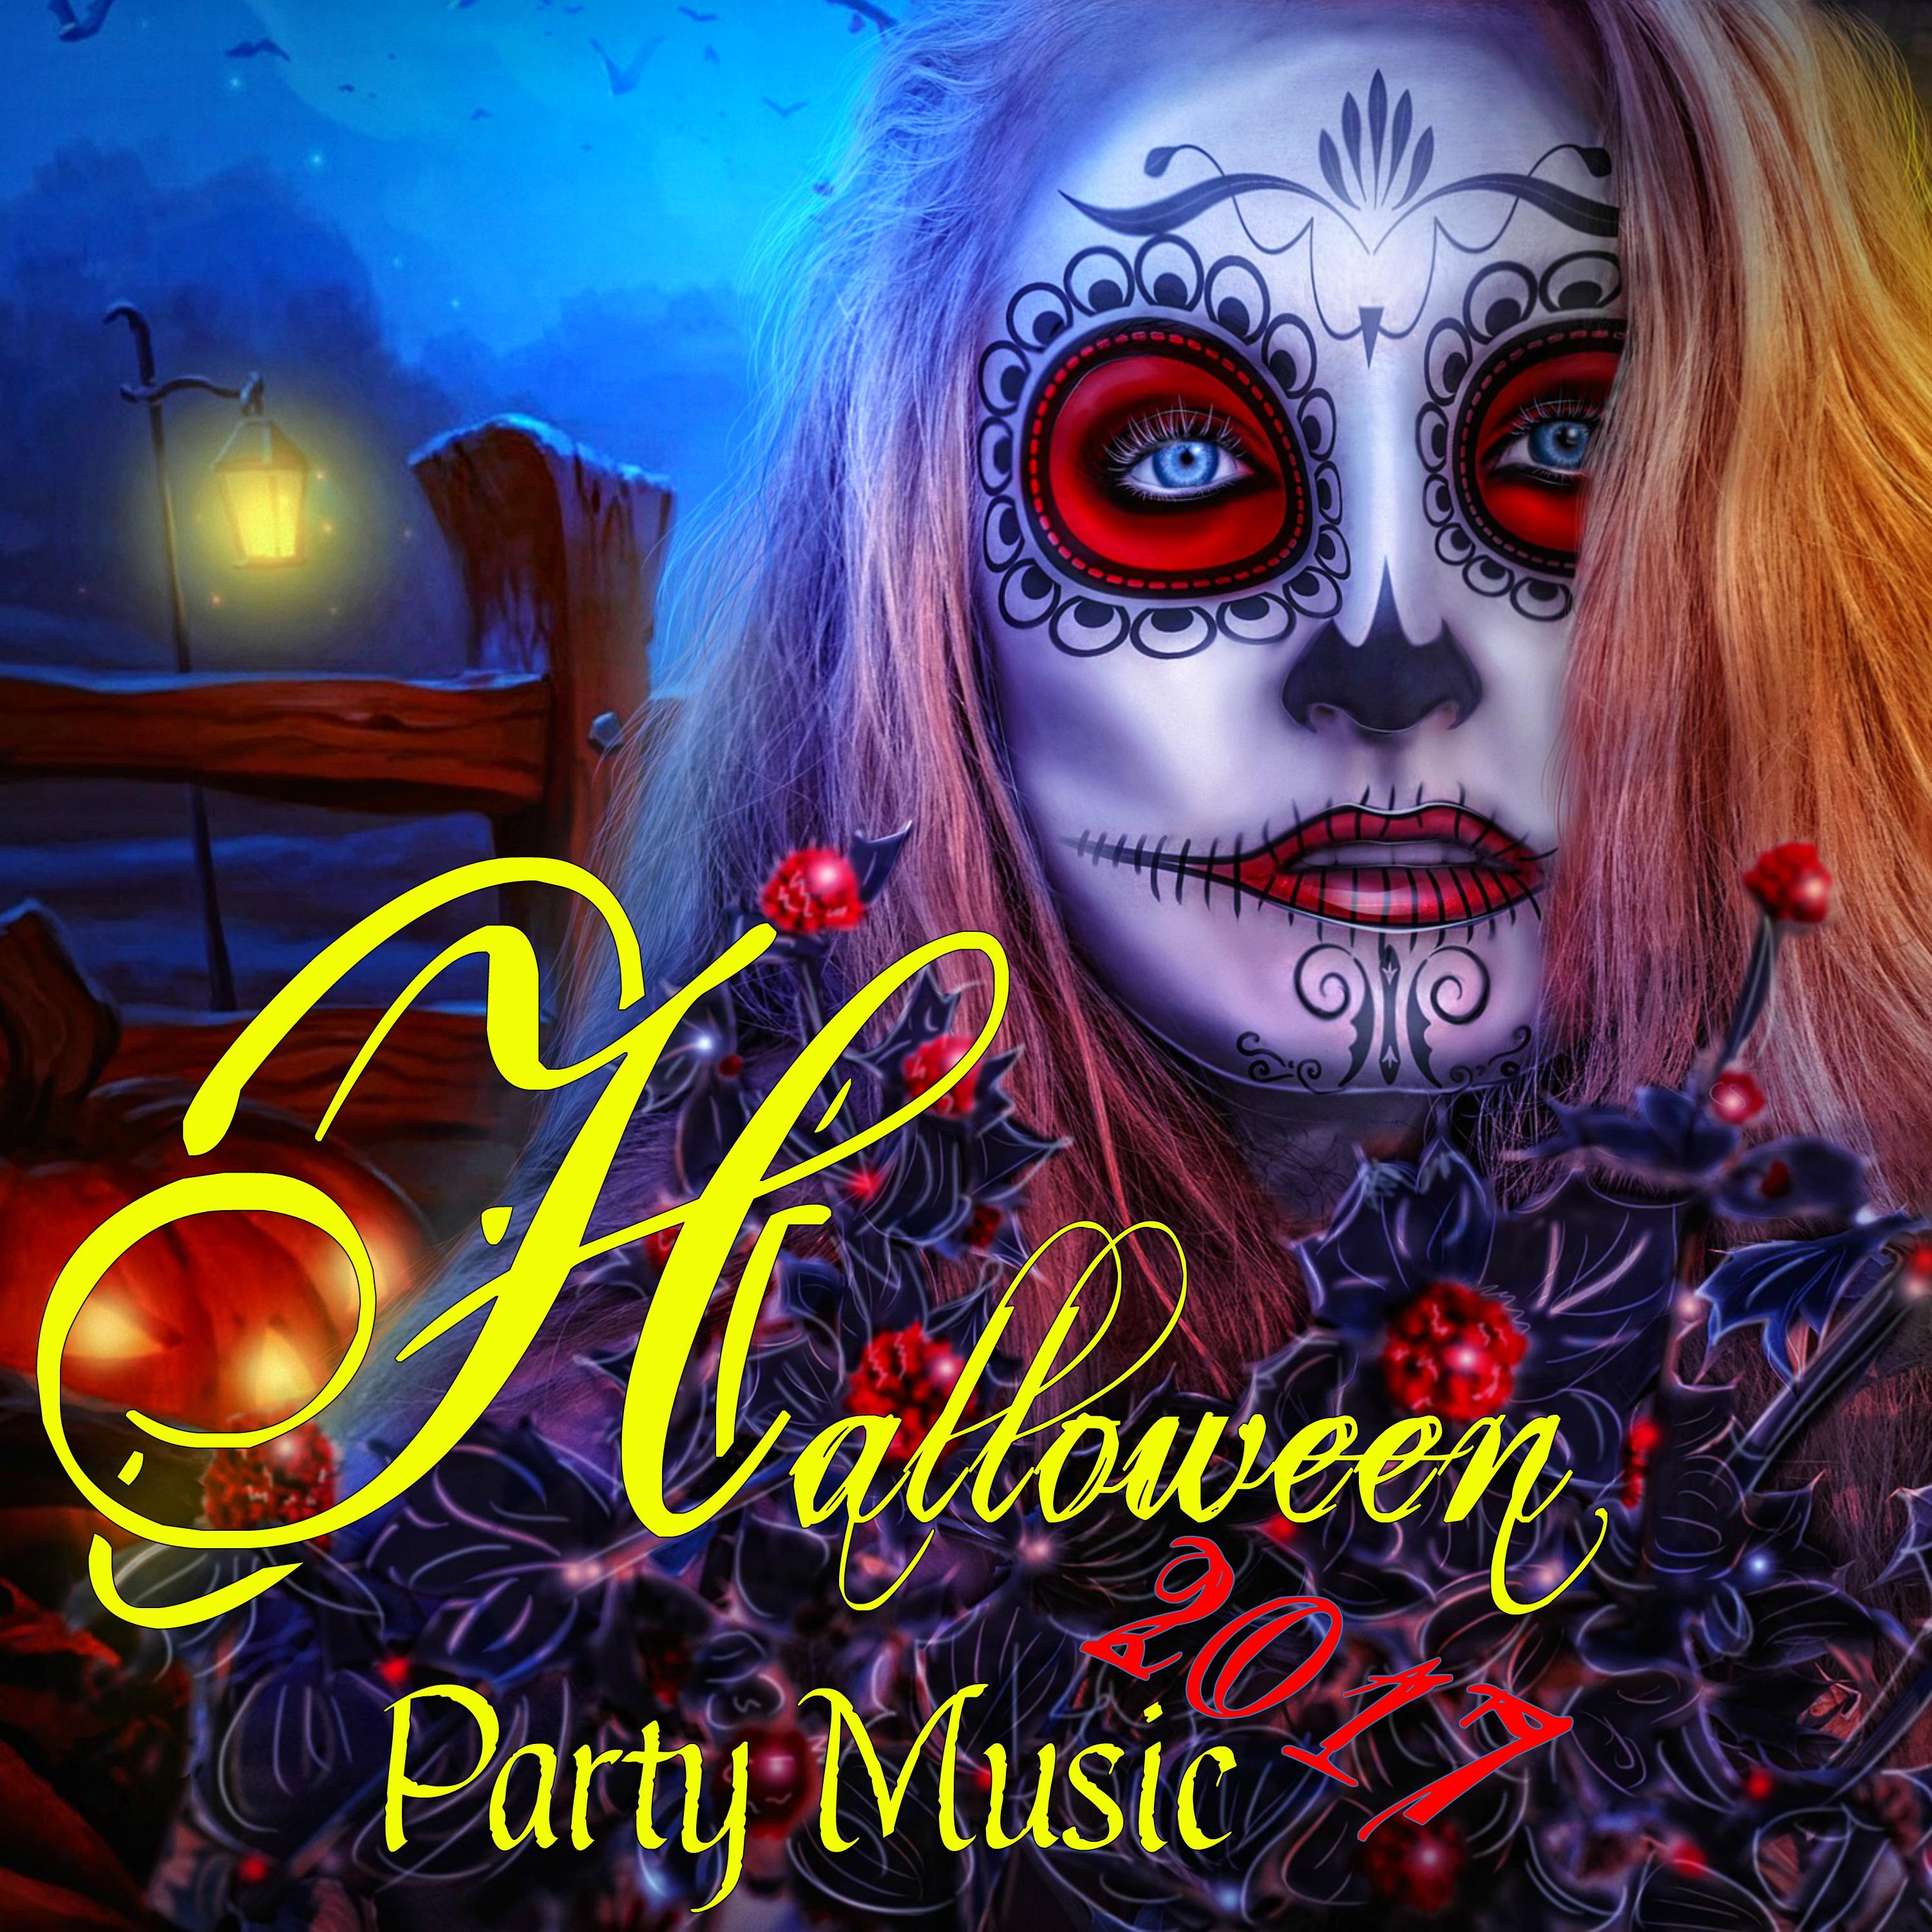 Halloween Party Music 2017  EDM Halloween Music, Scary Creepy Halloween Party Electronic Songs  Workout Songs